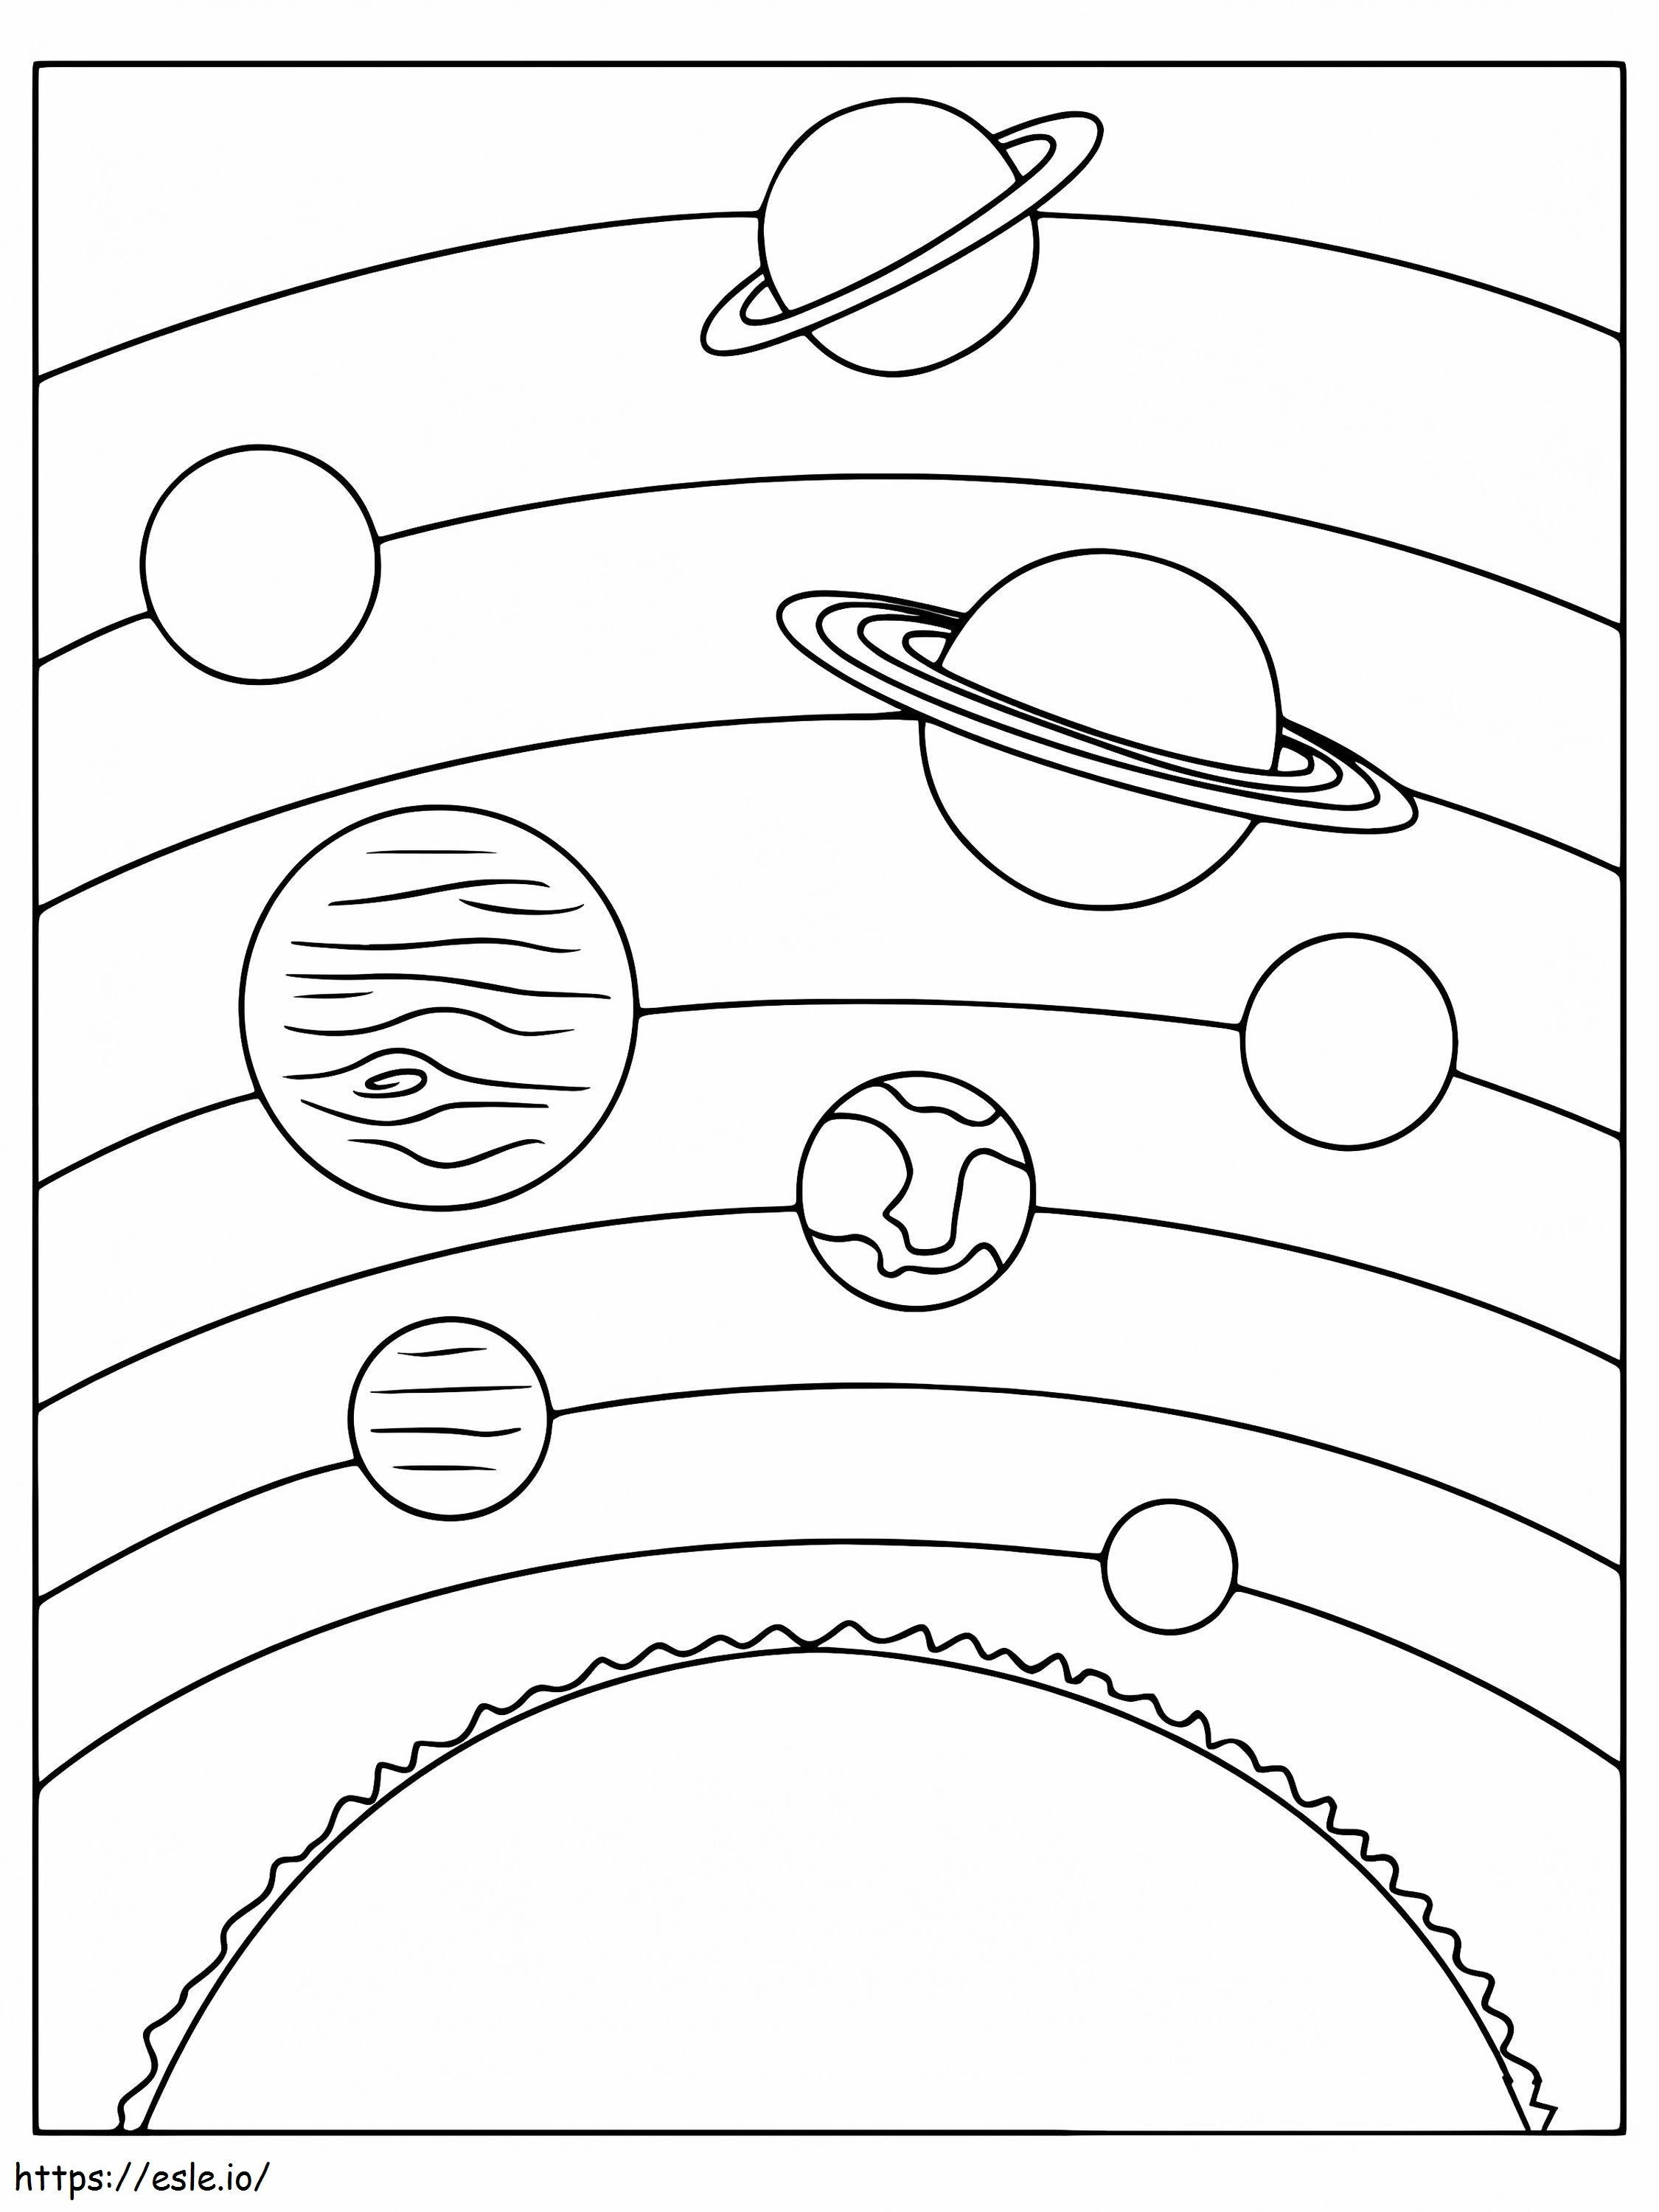 Simple Solar System coloring page